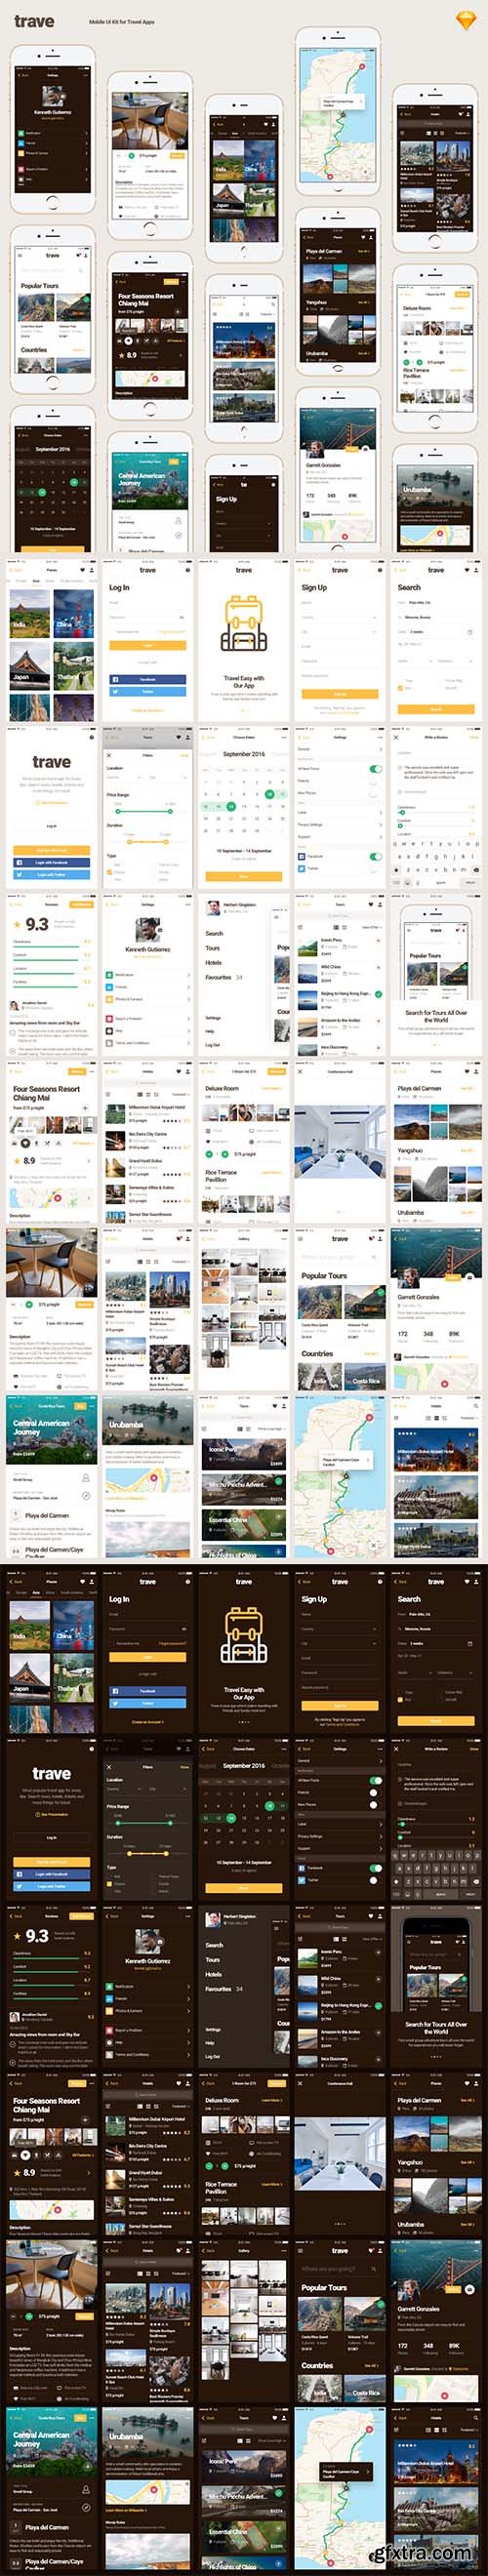 Trave UI Kit - 30 Mobile Screens for Travel Apps